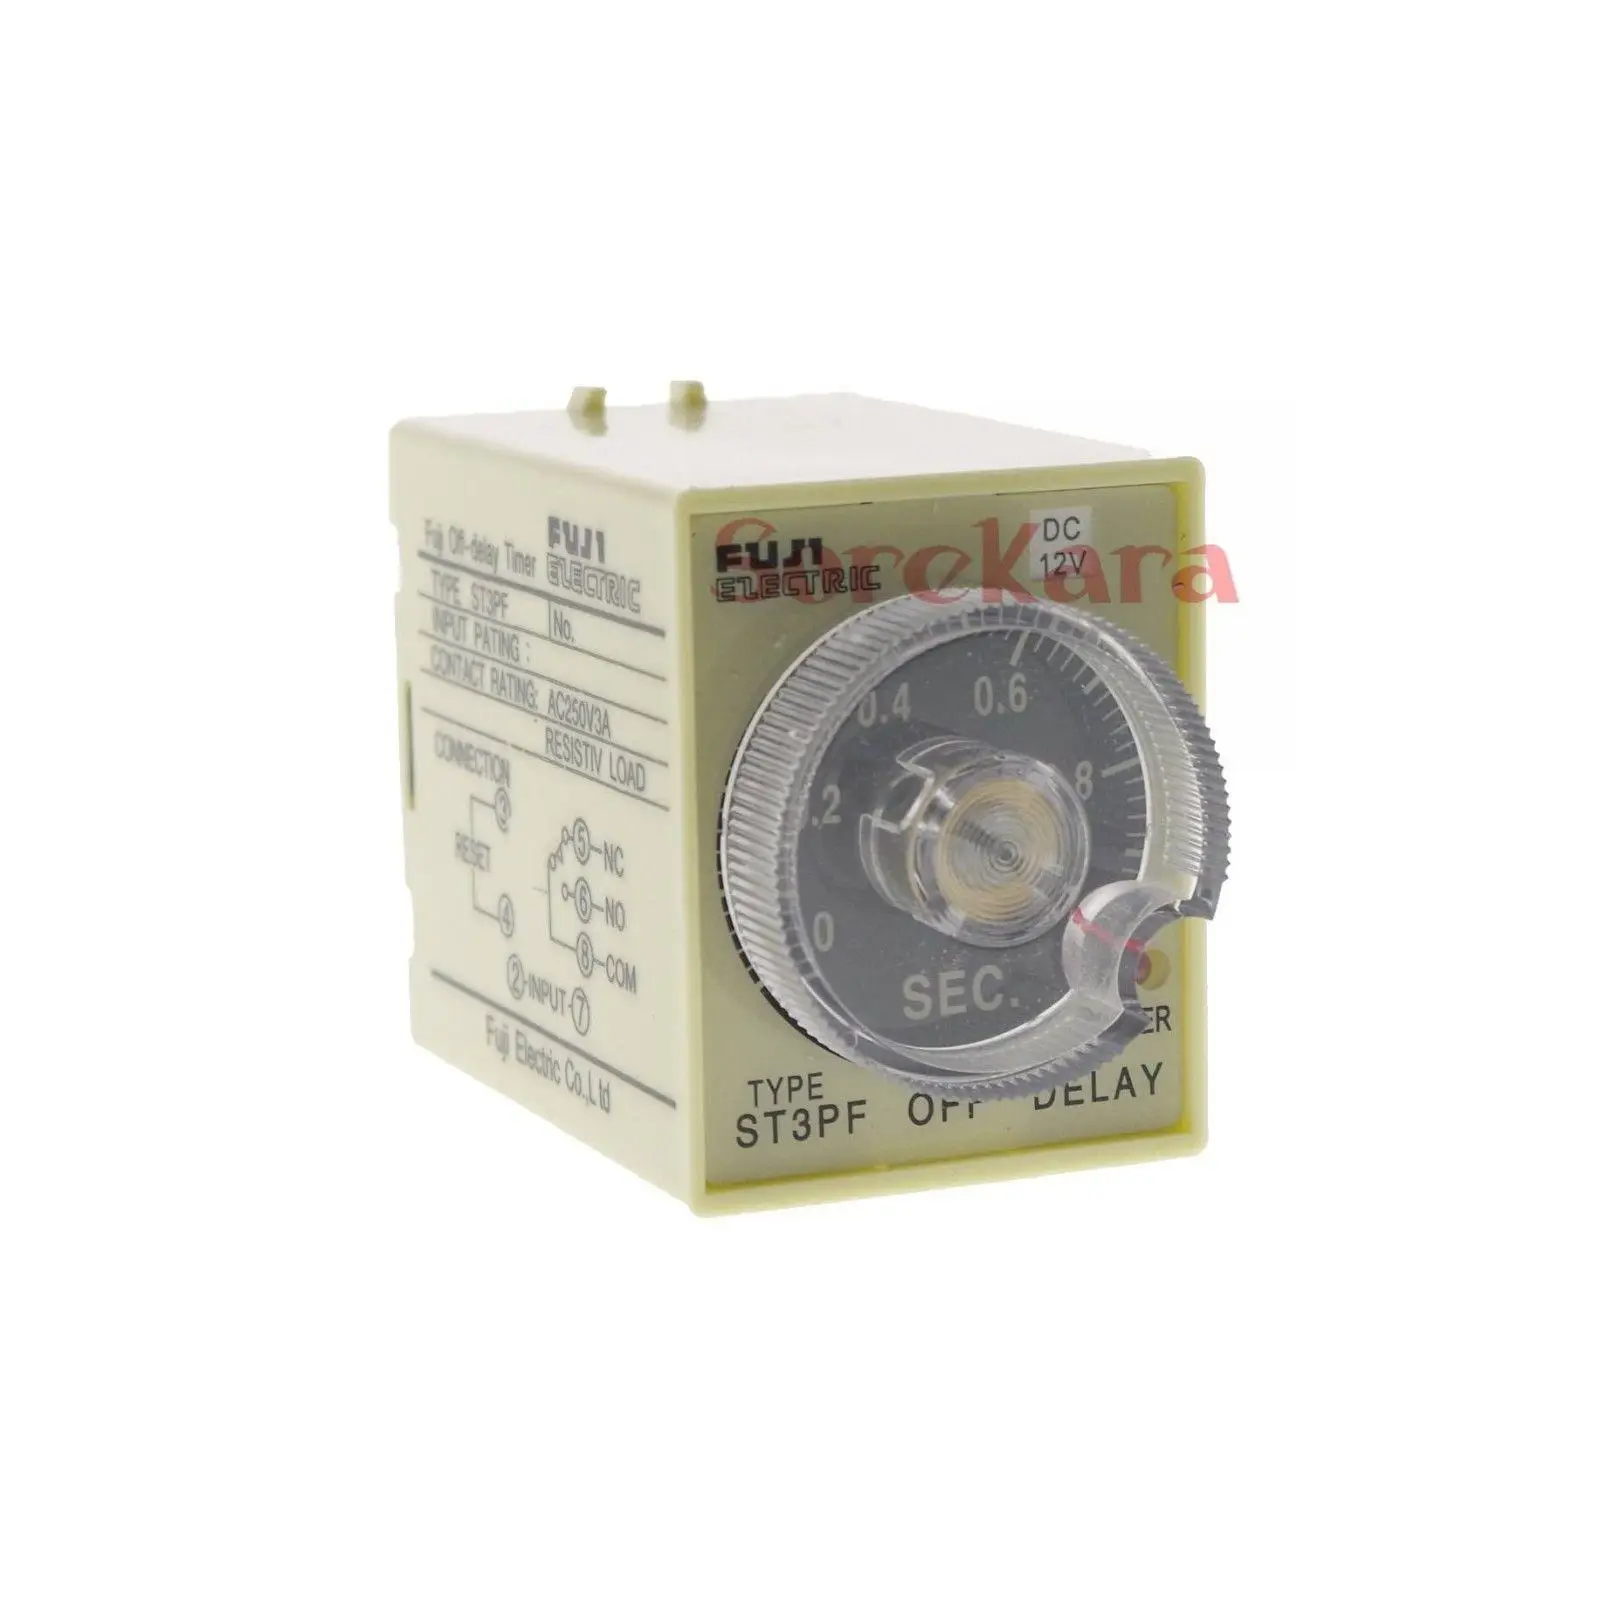 24VAC Power off delay time ST3PF Relay 0-30 seconds with Socket Base PF083A 